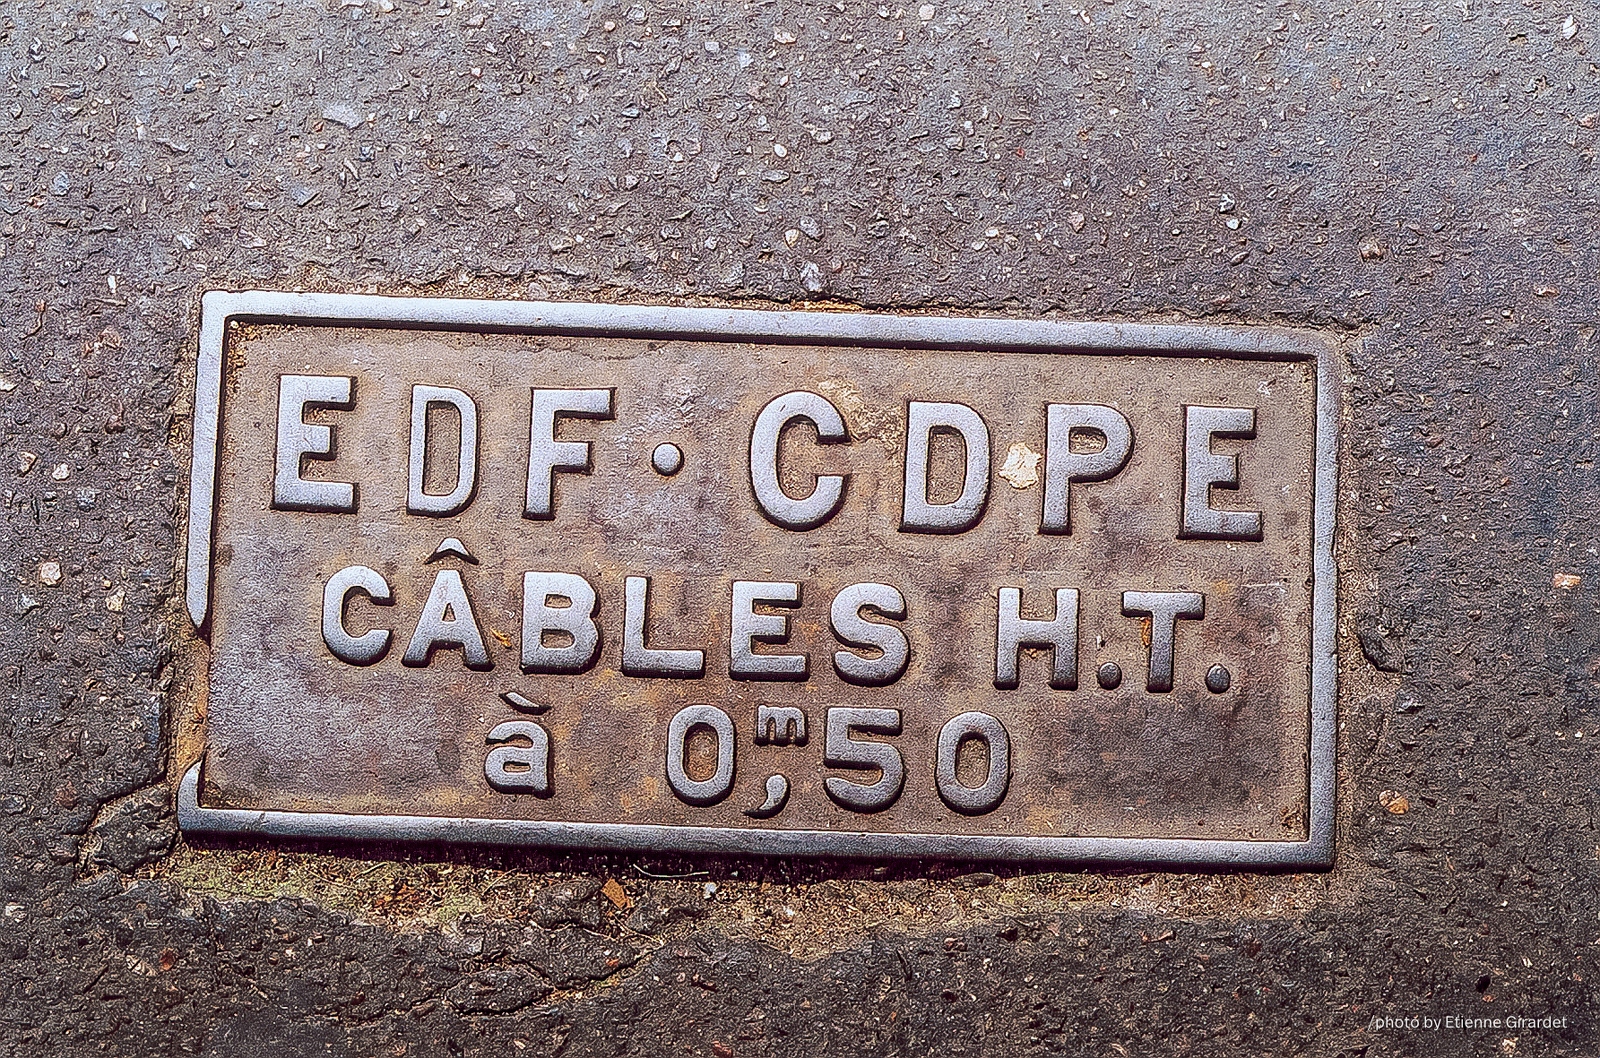 200307d_cables_GTM-manhole-cover-edf-cables-by-E-Girardet.jpg